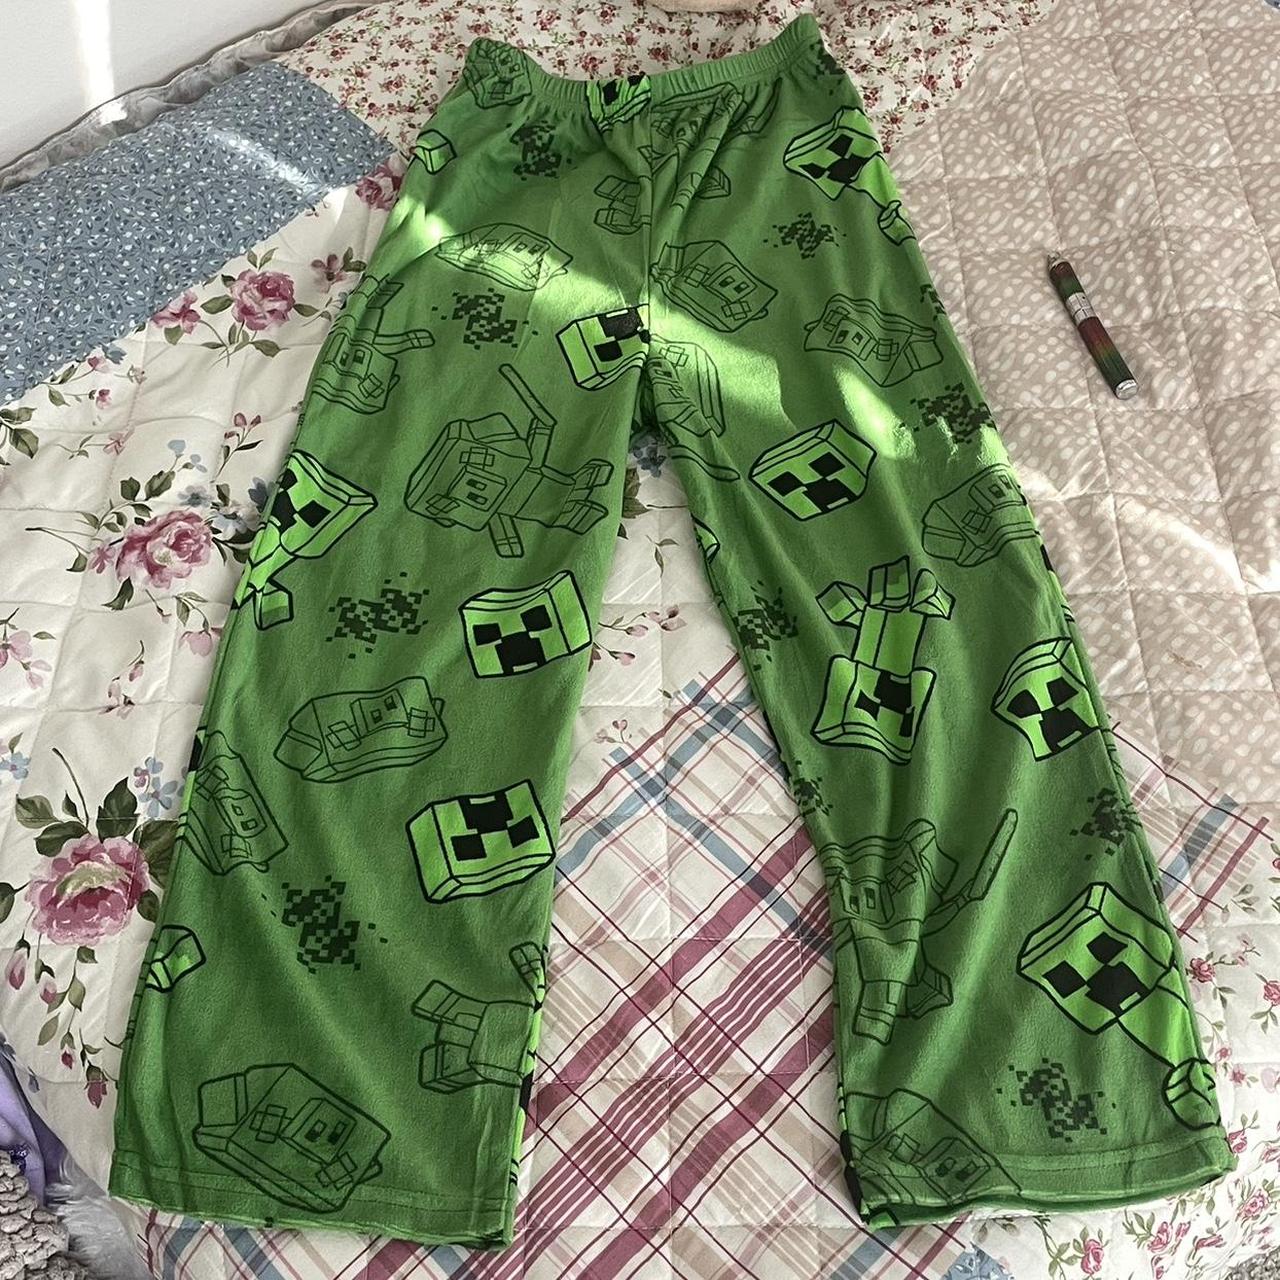 Minecraft boxers Idk size refer to measurements - Depop